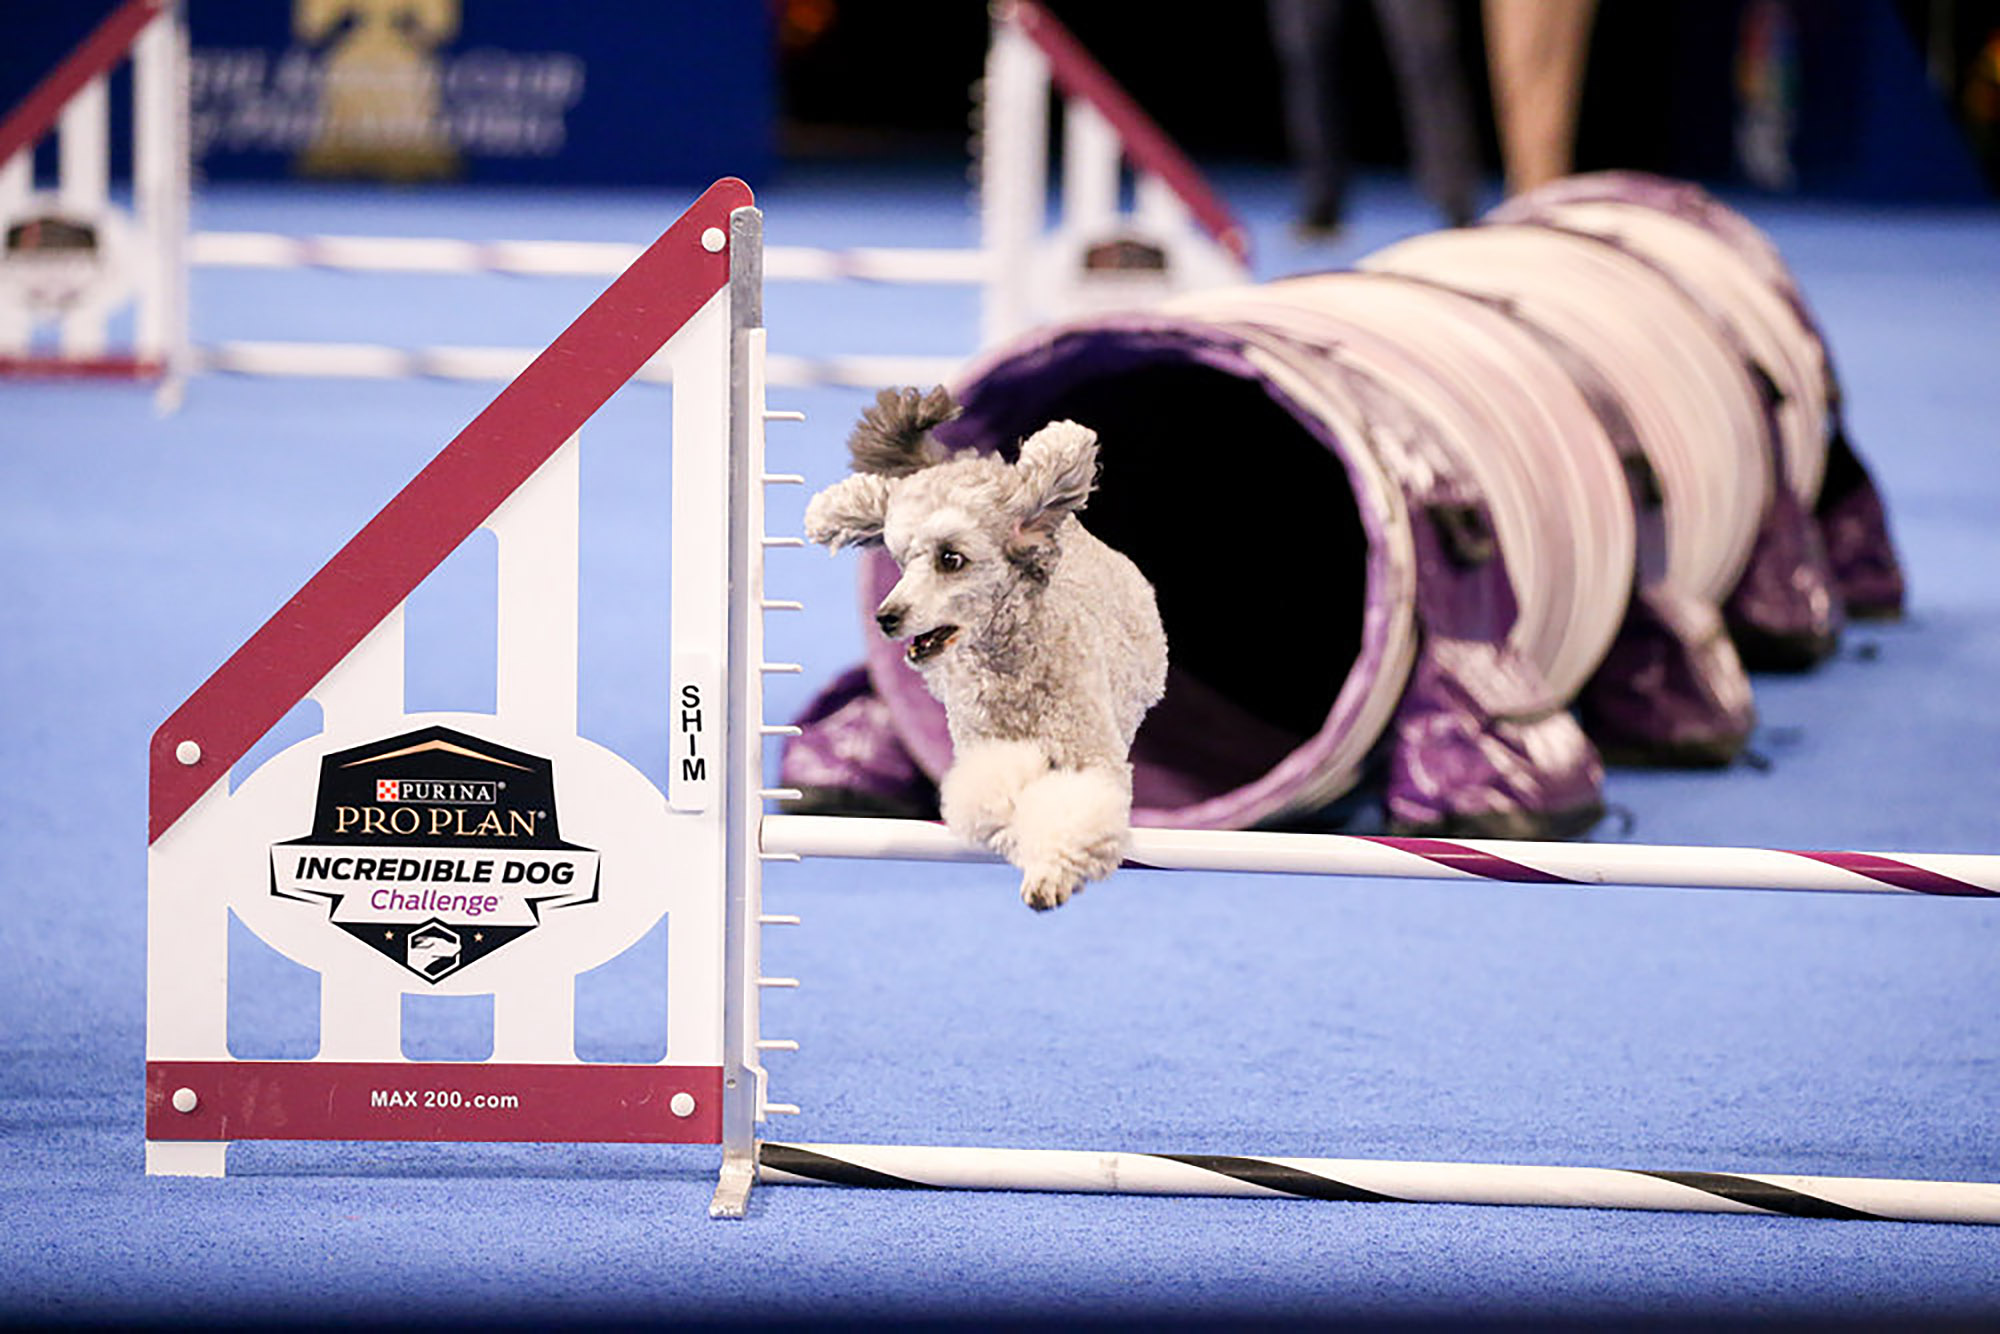 Miniature Poodle competing in the show.